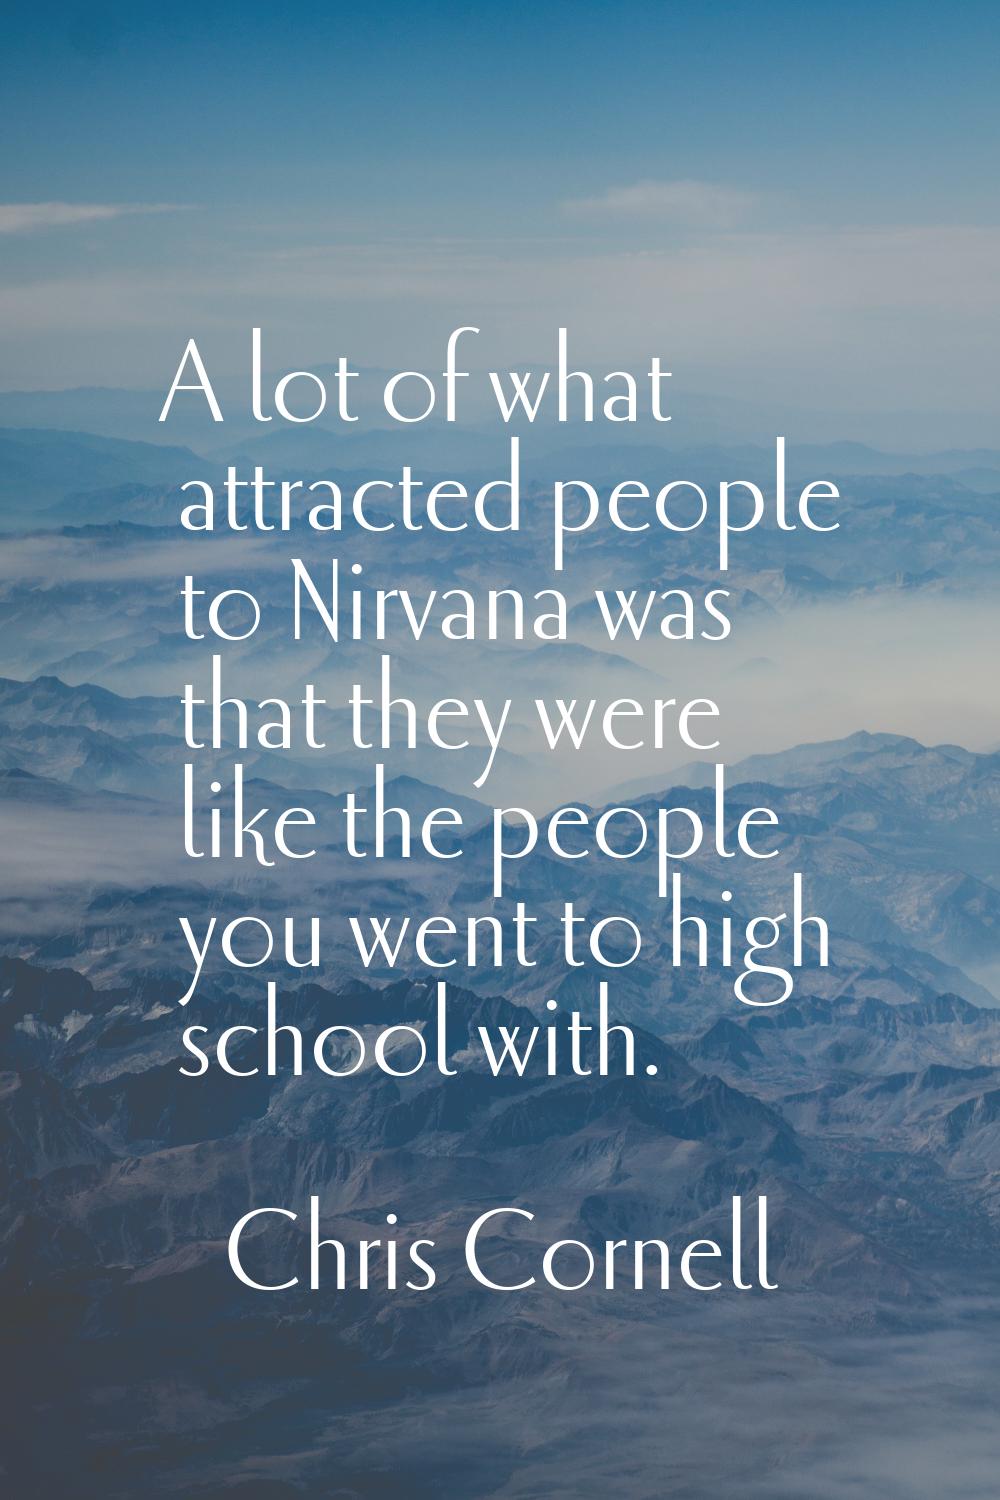 A lot of what attracted people to Nirvana was that they were like the people you went to high schoo